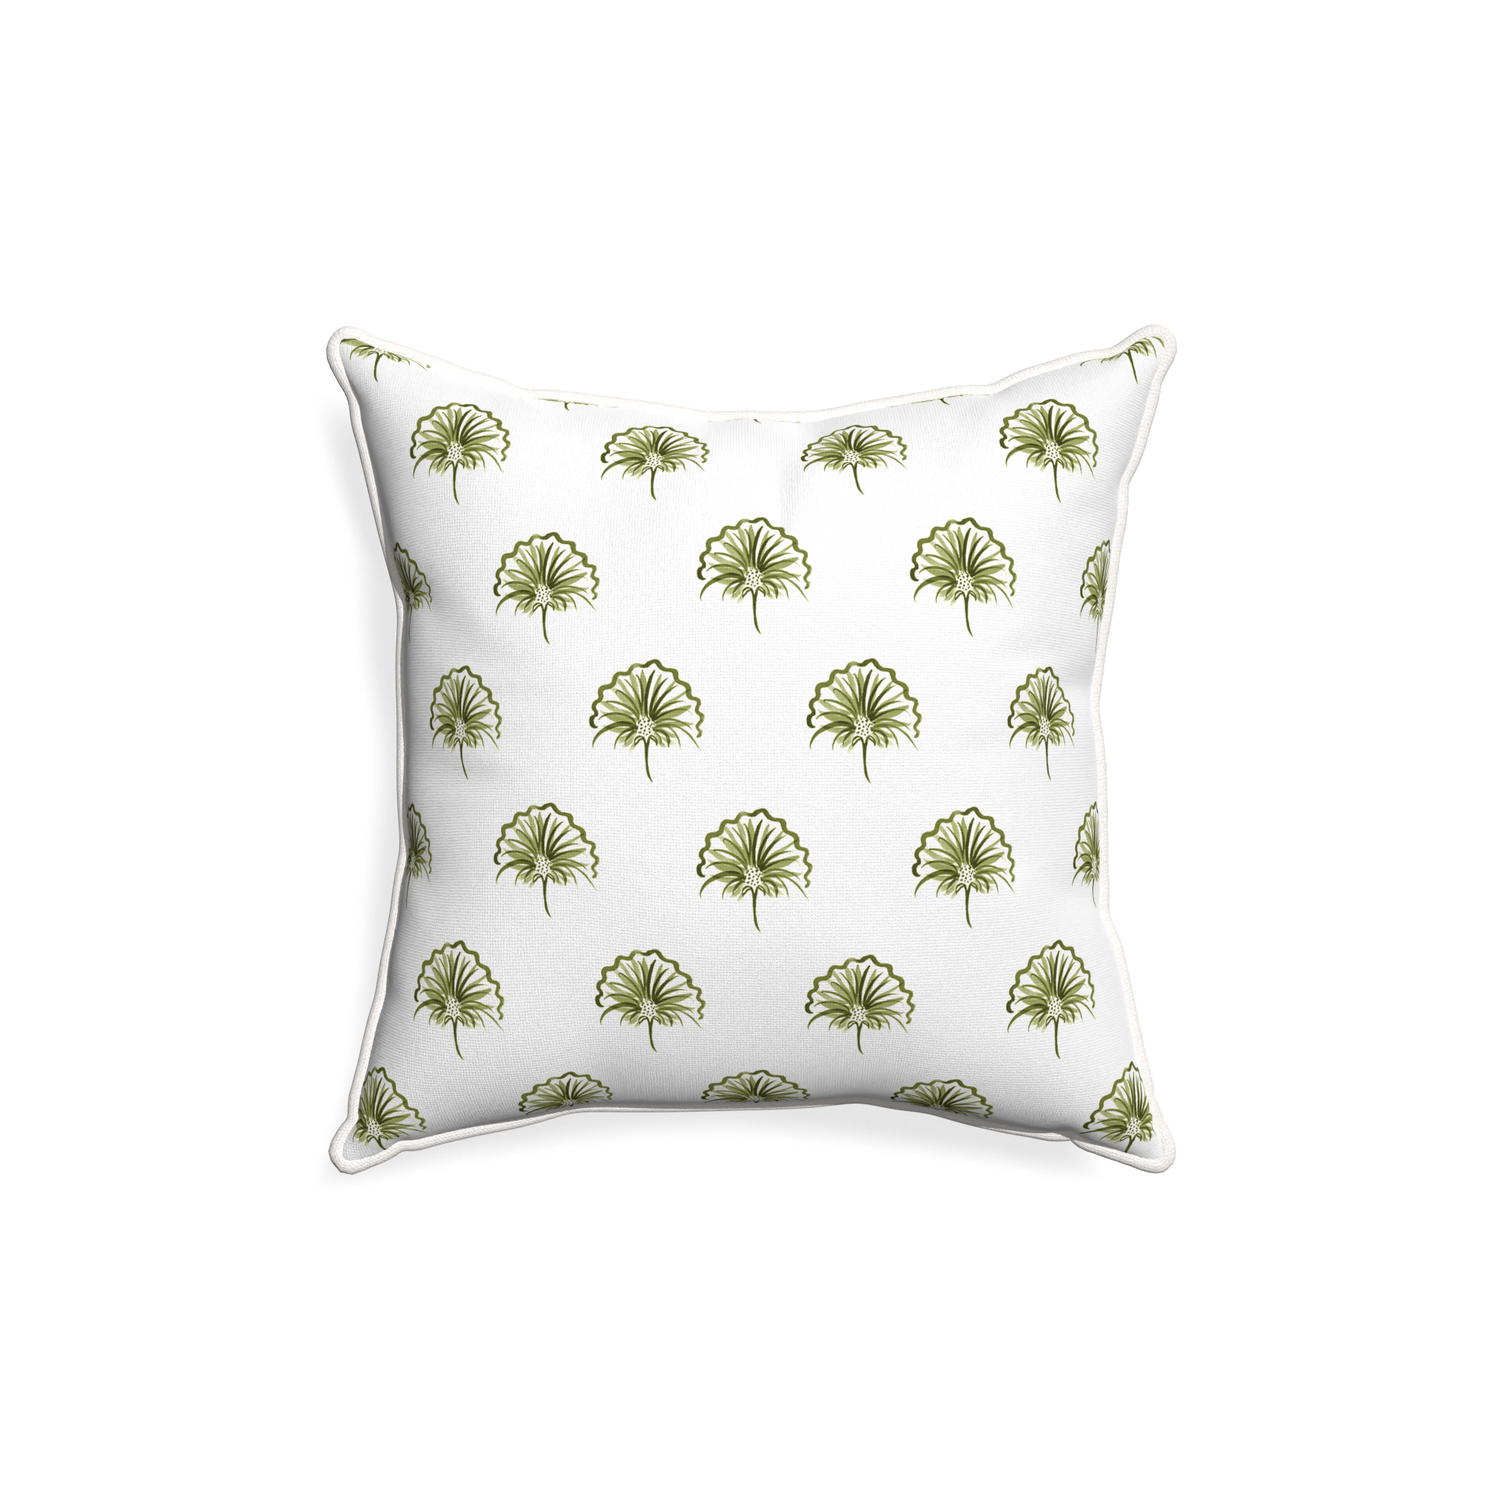 18-square penelope moss custom green floralpillow with snow piping on white background